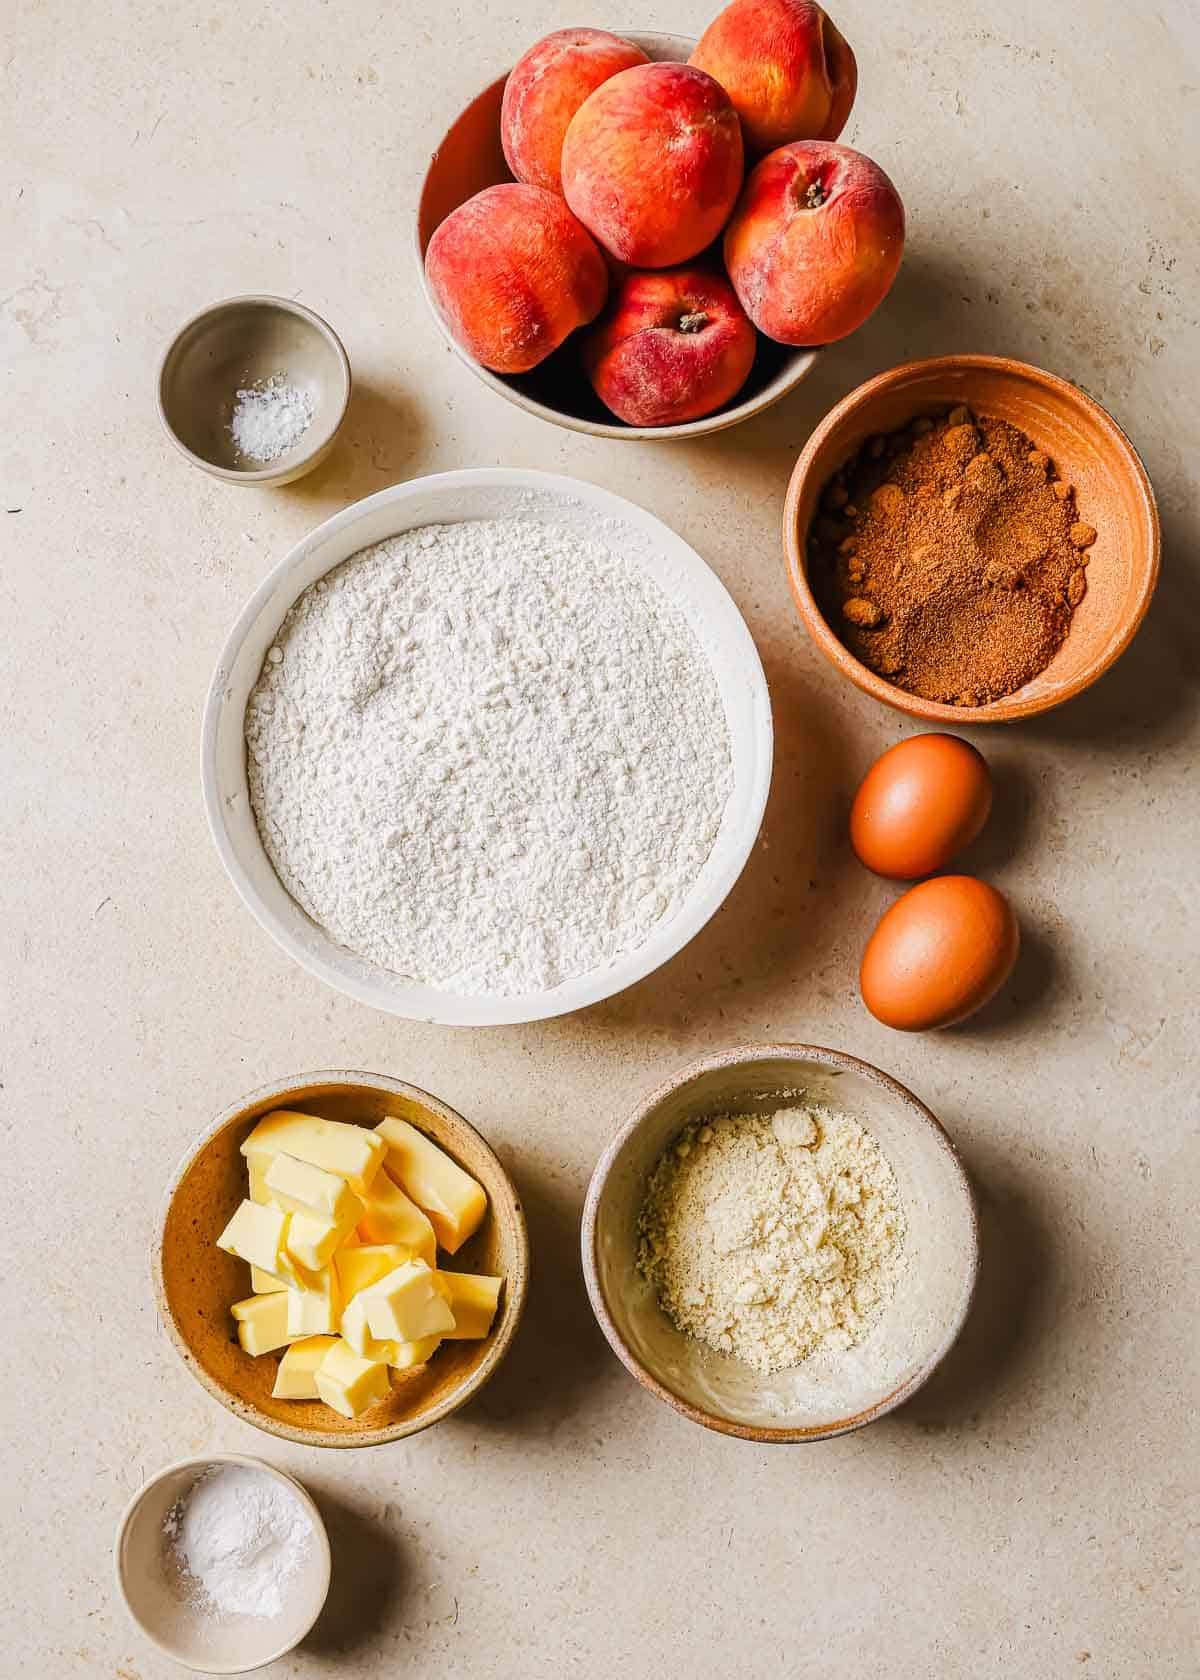 Ingredients for baking a peach tart arranged on a table, including flour, eggs, butter, sugar, peaches, and spices in separate bowls.